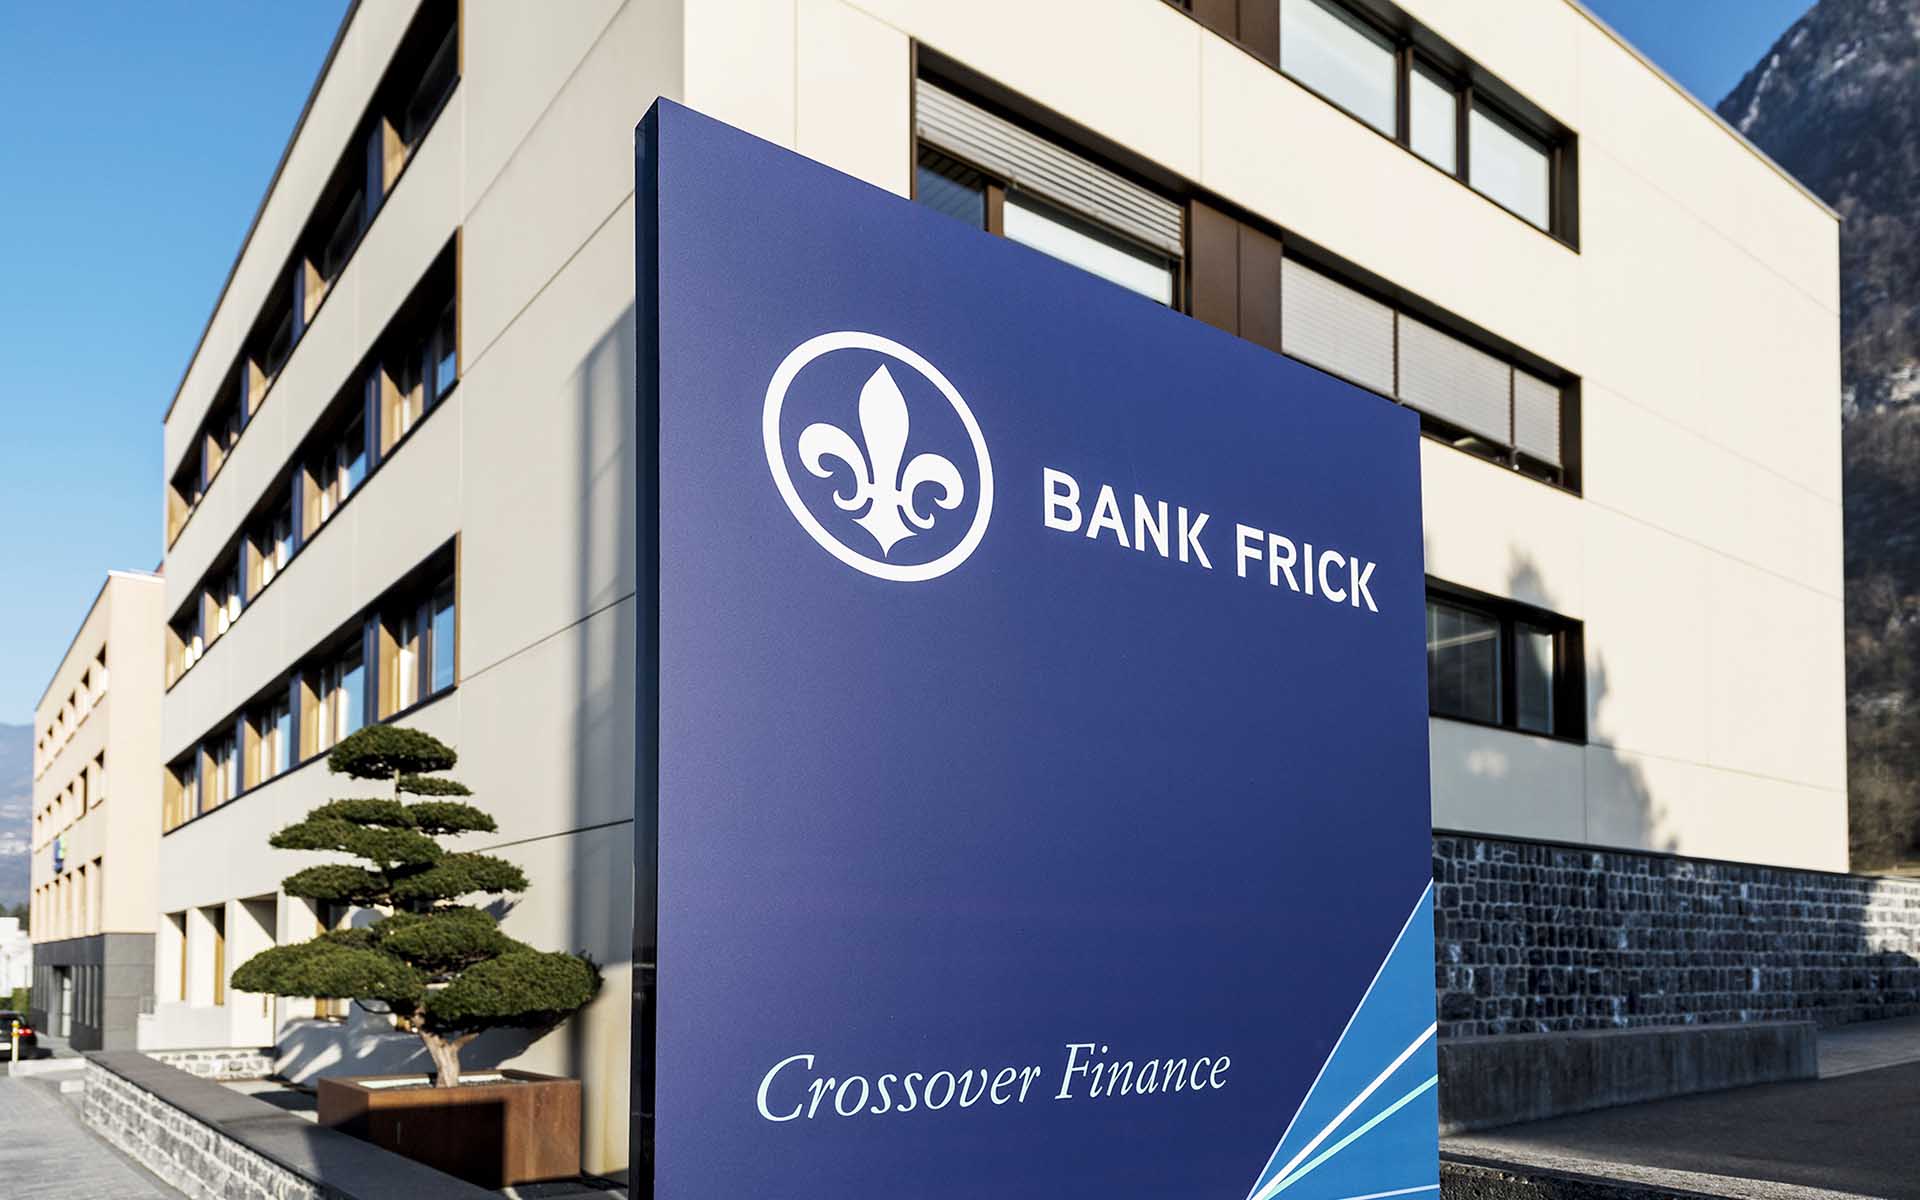 Liechtenstein's Bank Frick is Offering Cryptocurrency Investments and Cold Storage